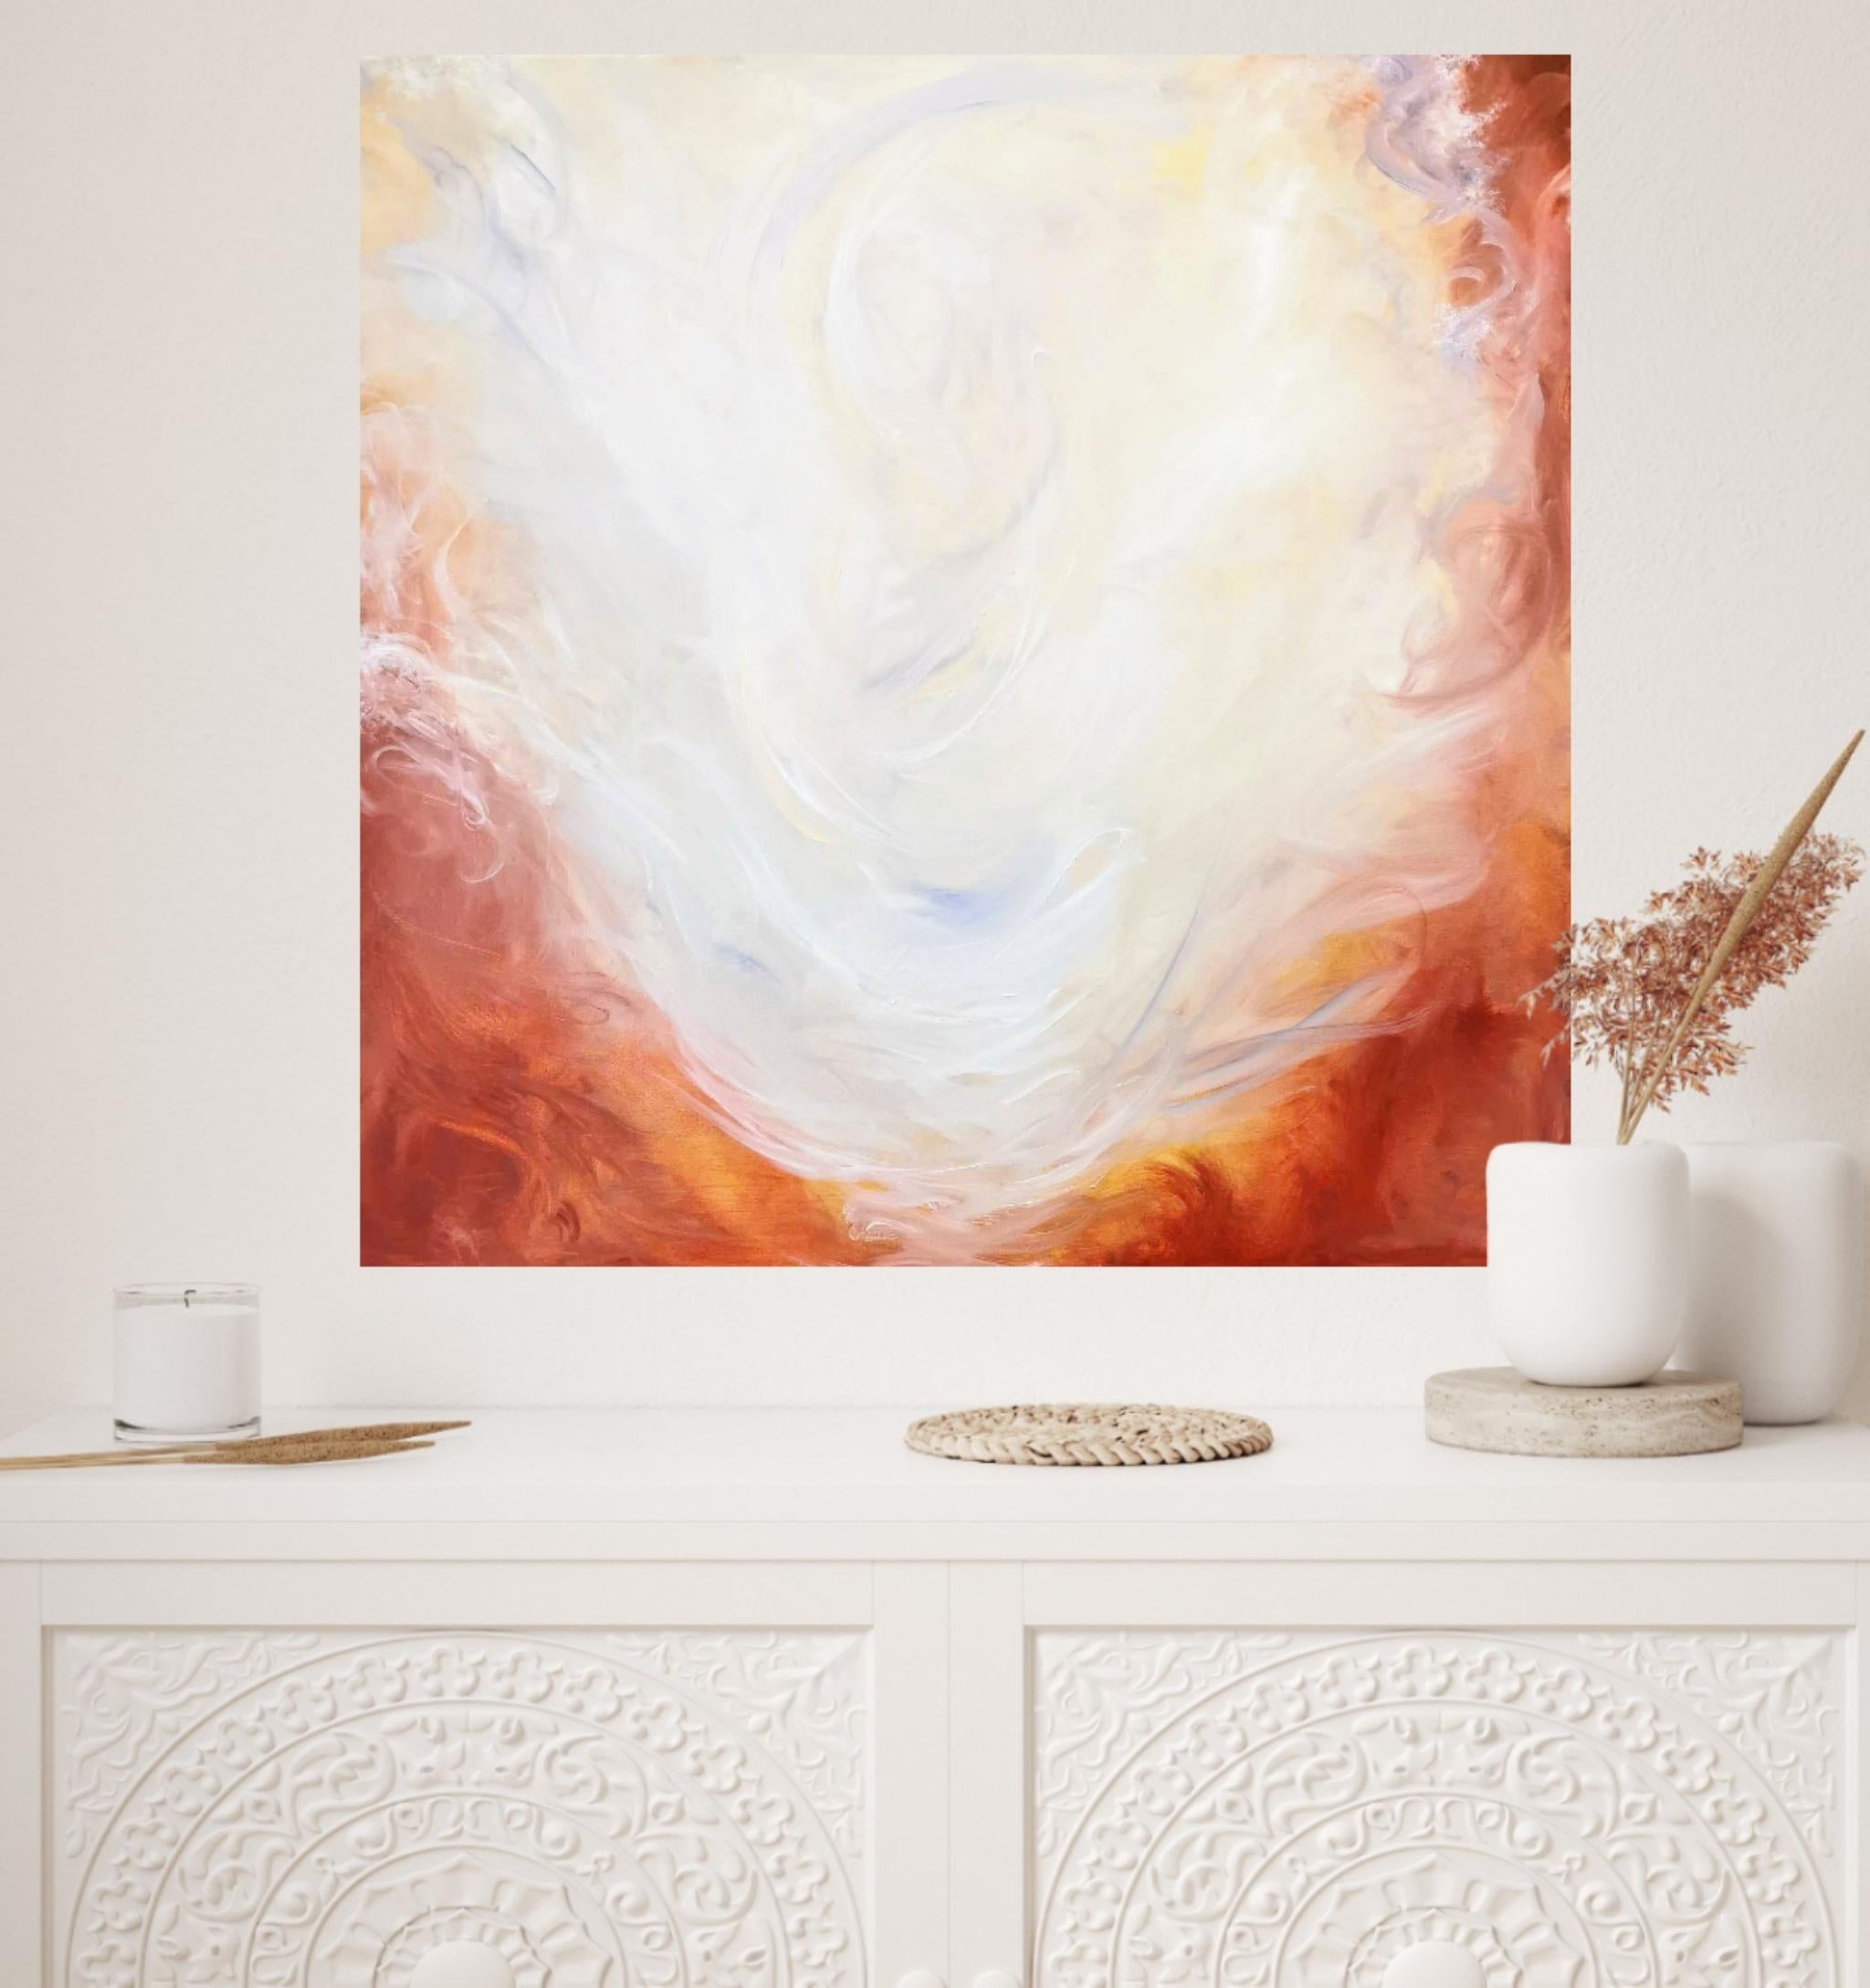 Life everlasting - Abstract expressionist red, orange, and white painting For Sale 4